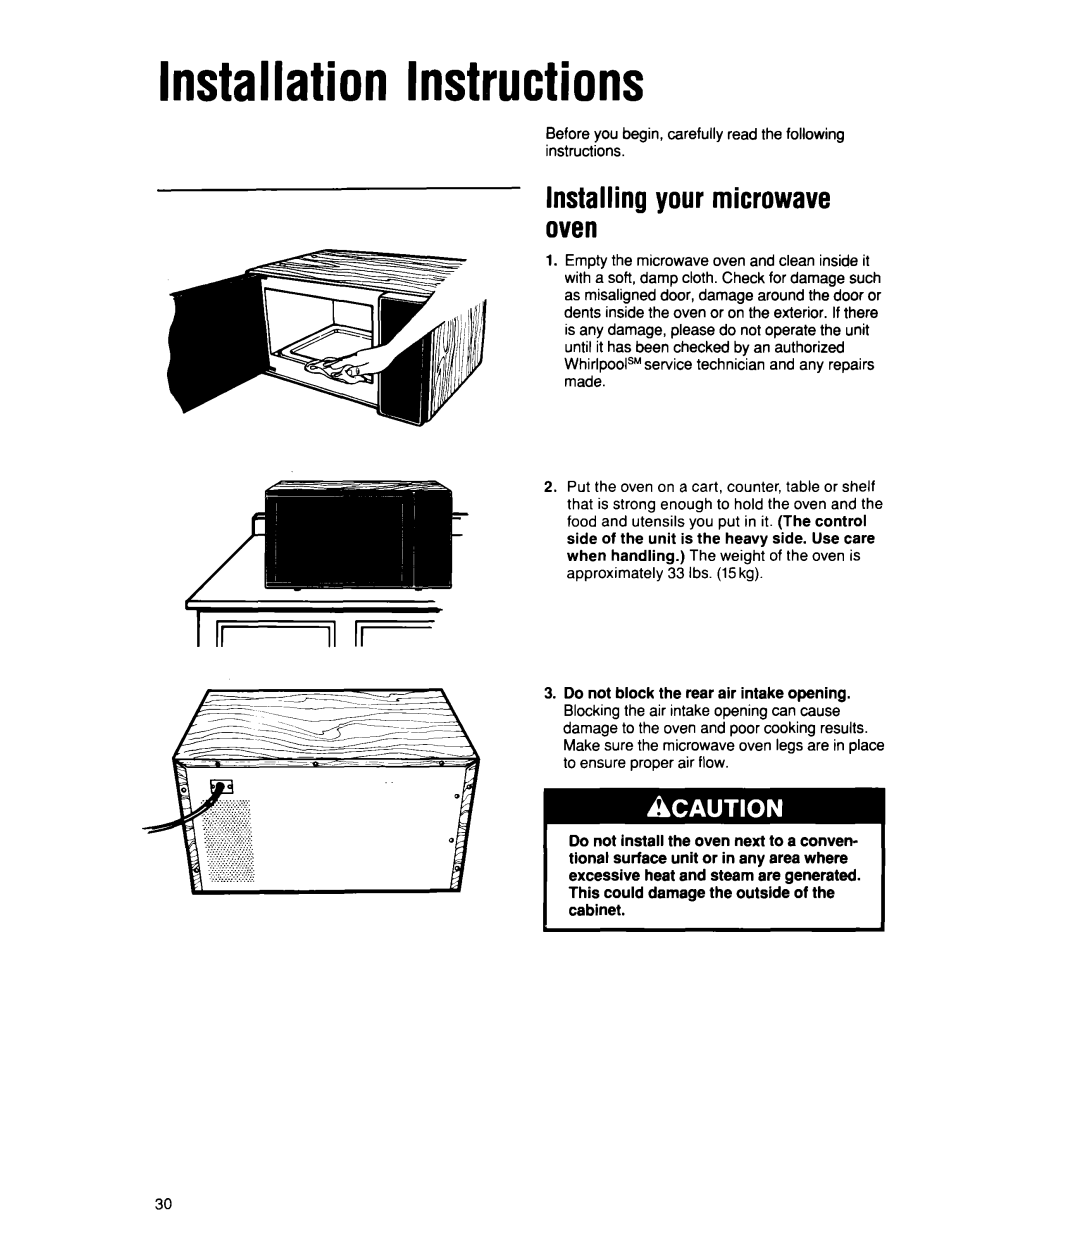 Whirlpool MS2100XW Installation Instructions, Installing your microwave oven, Do not block the rear air intake opening 